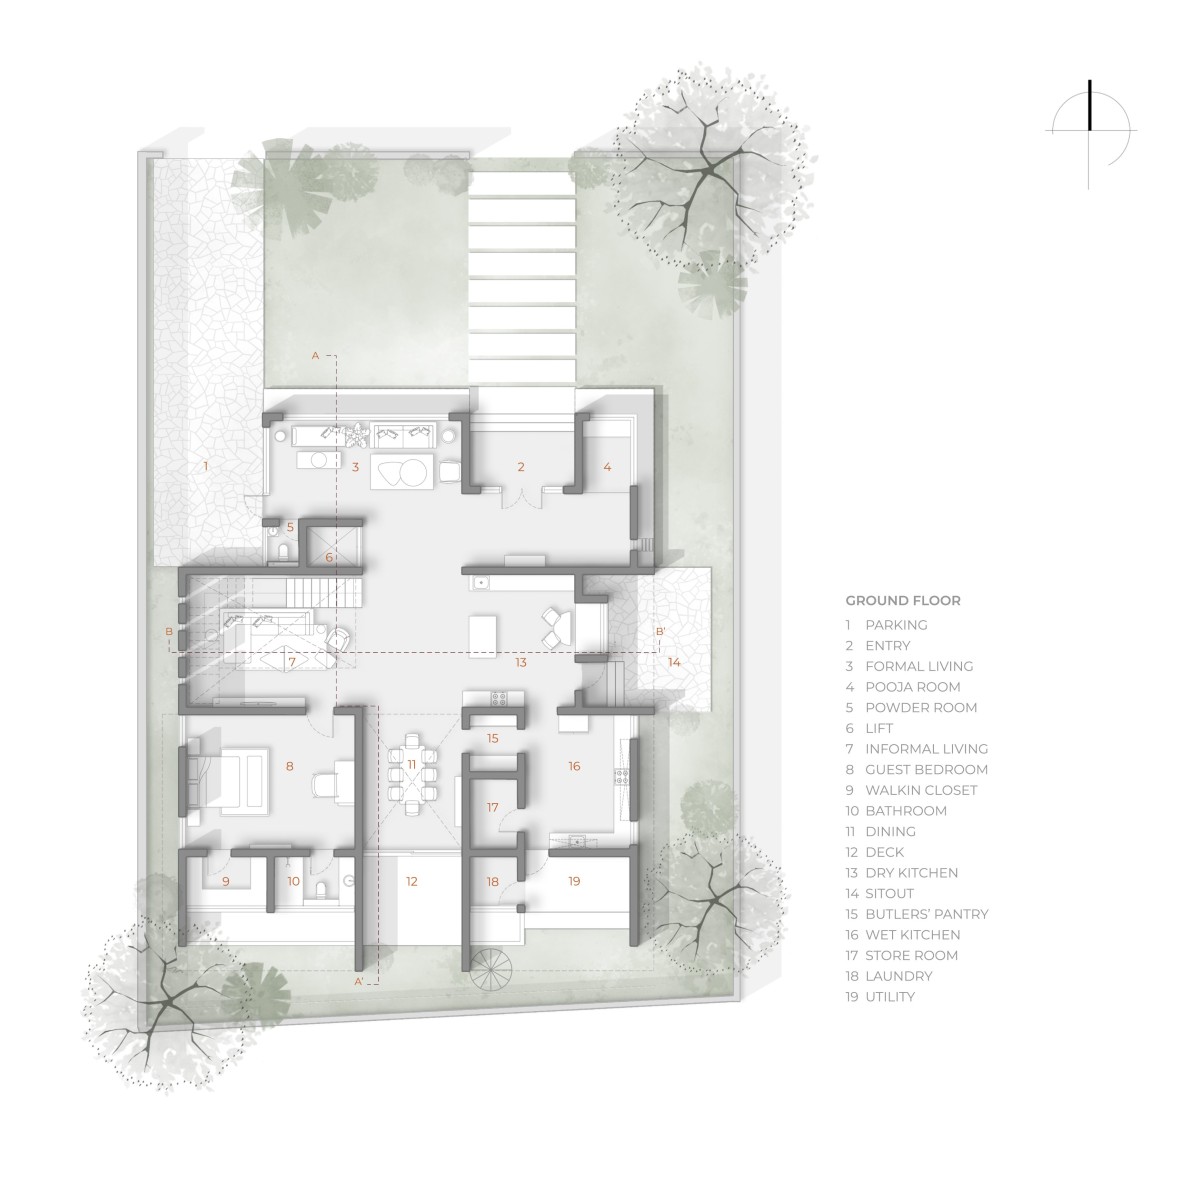 Ground Floor Plan of The House of Frames by KalaaZodh Architecture